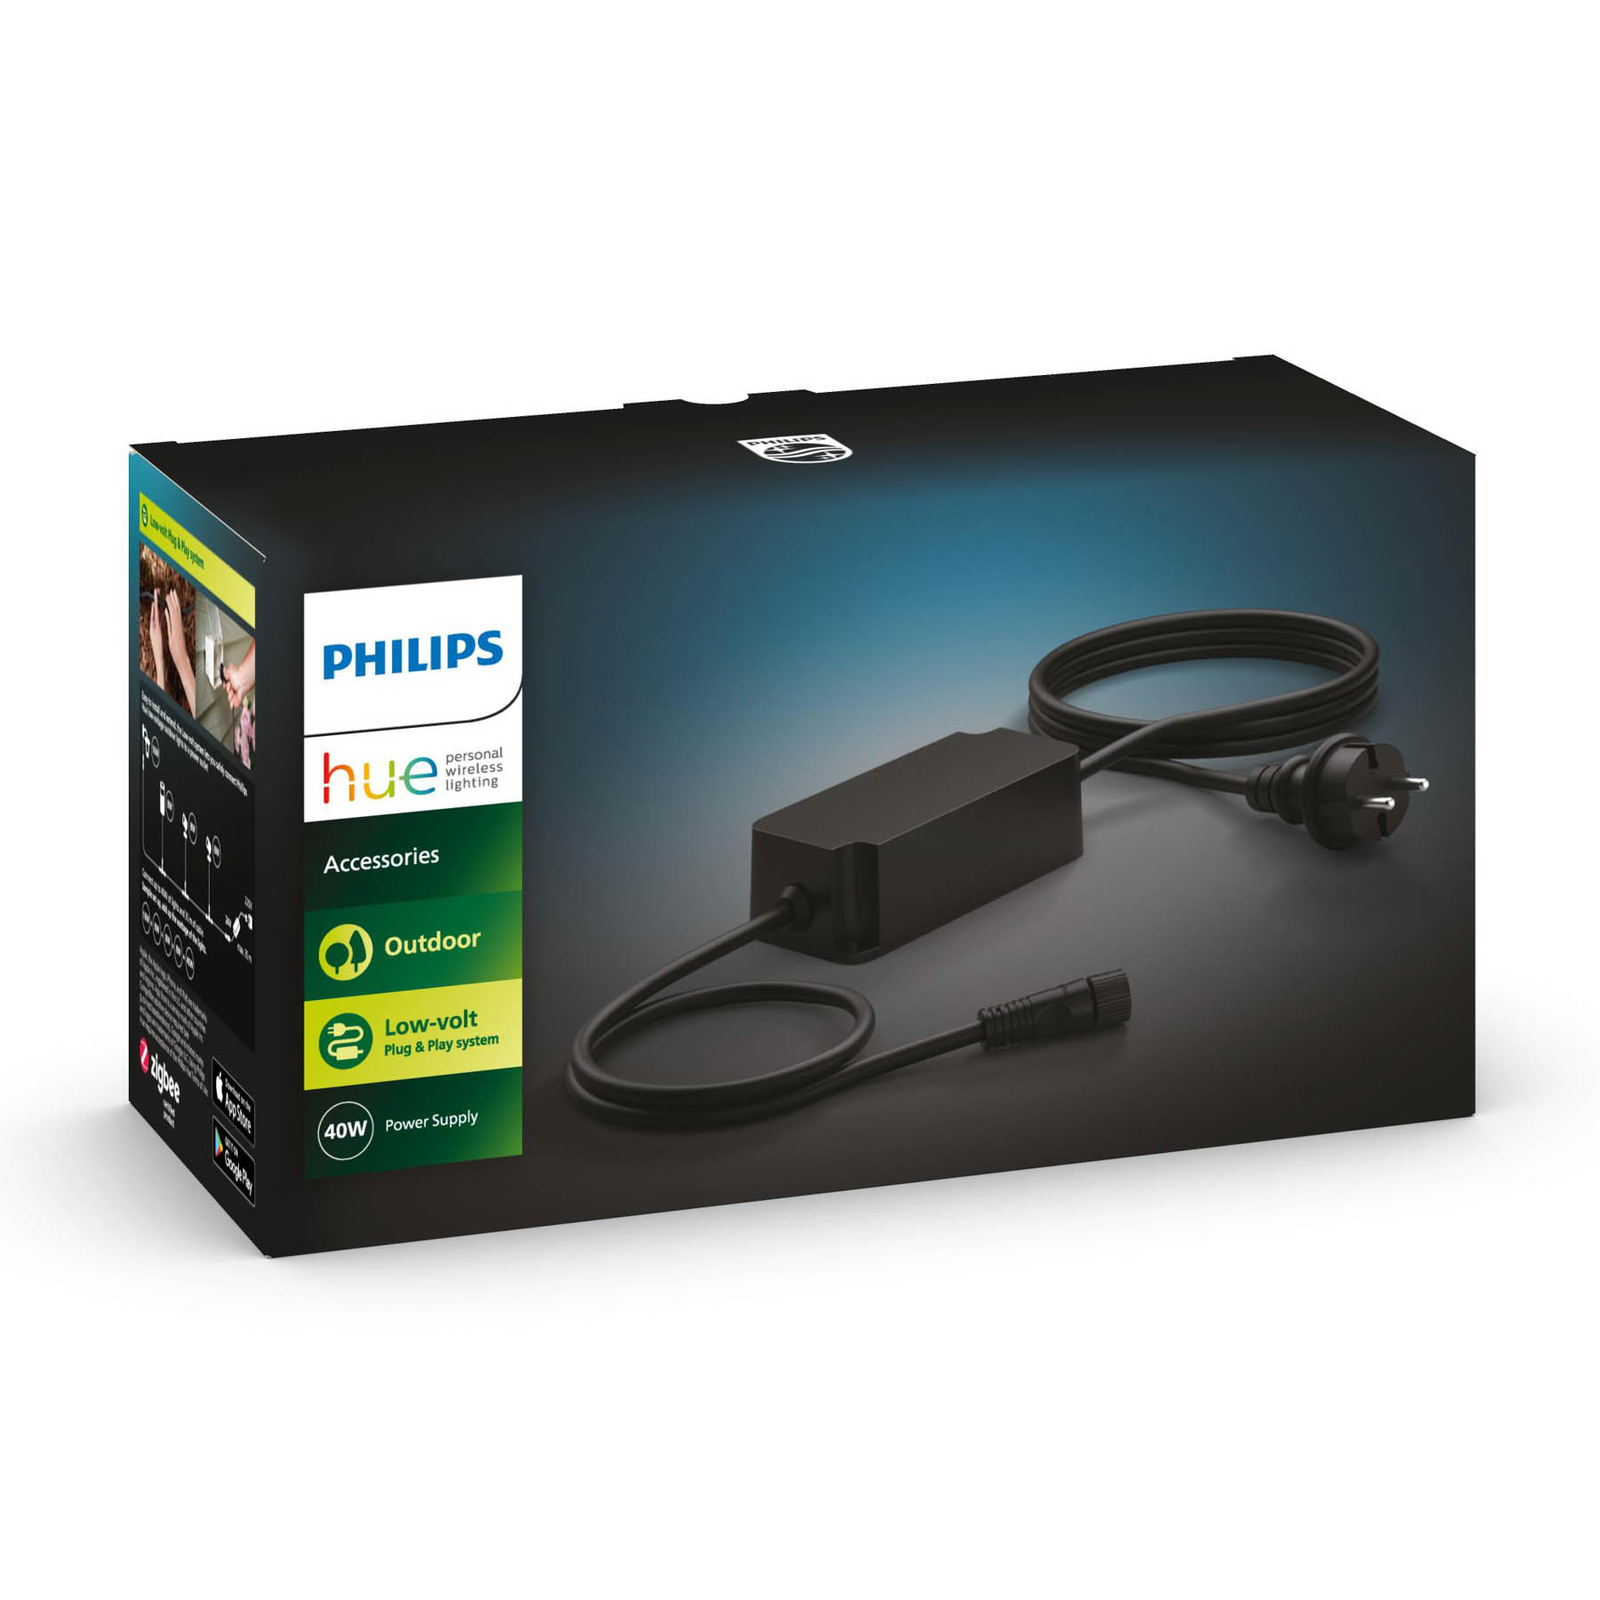 Philips Hue Outdoor voeding, 1 uitgang, 24V, 40W